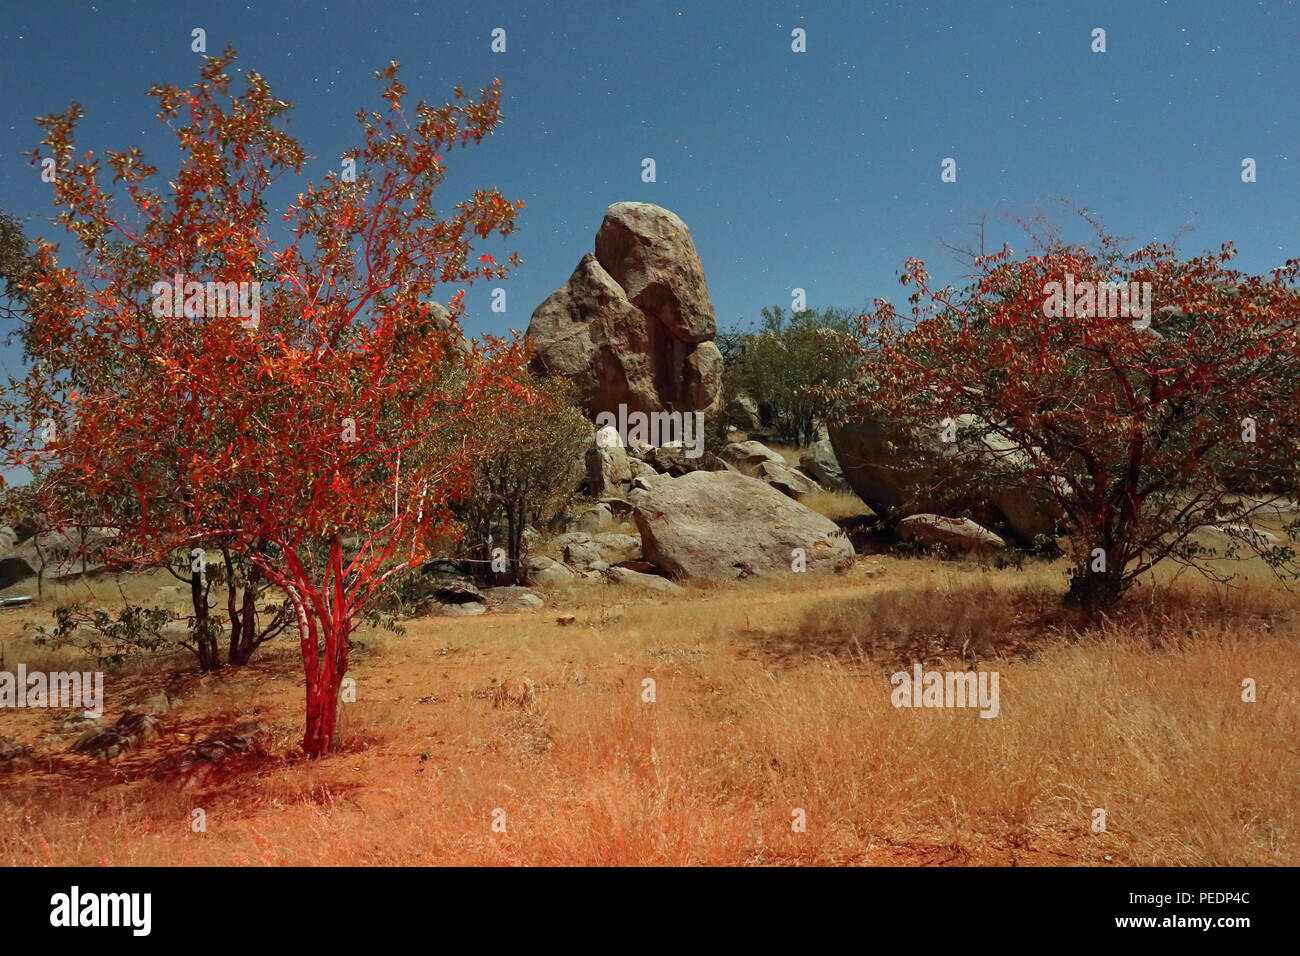 A moonlit granite outcrop rises between mopani trees, Hoada campsite, Damaraland, Namibia. Red foliage created using a red LED torch and long exposure. Stock Photo